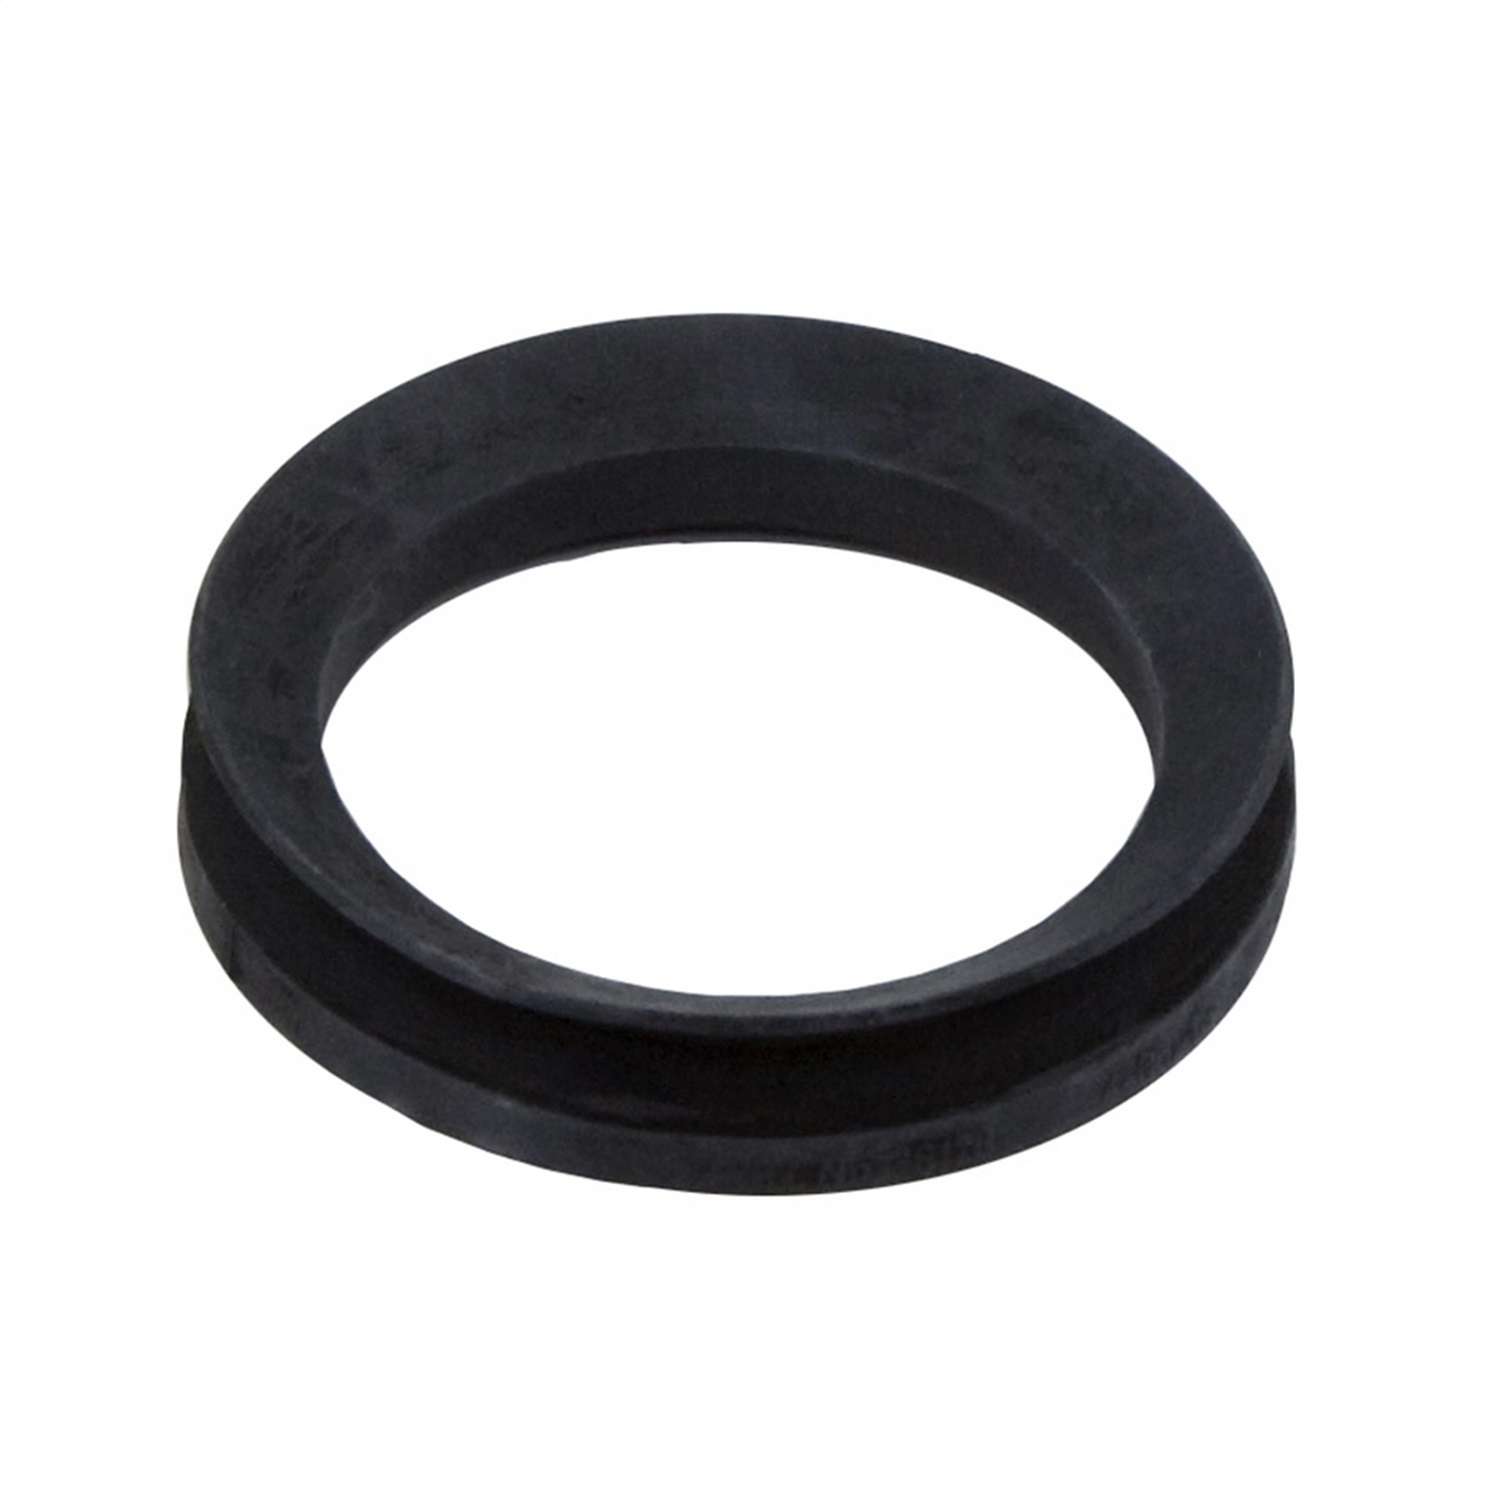 Omix This Dana 30 Spindle Seal From Omix Fits 76-86 Jeep Cj Models With Front Disc Brakes.,